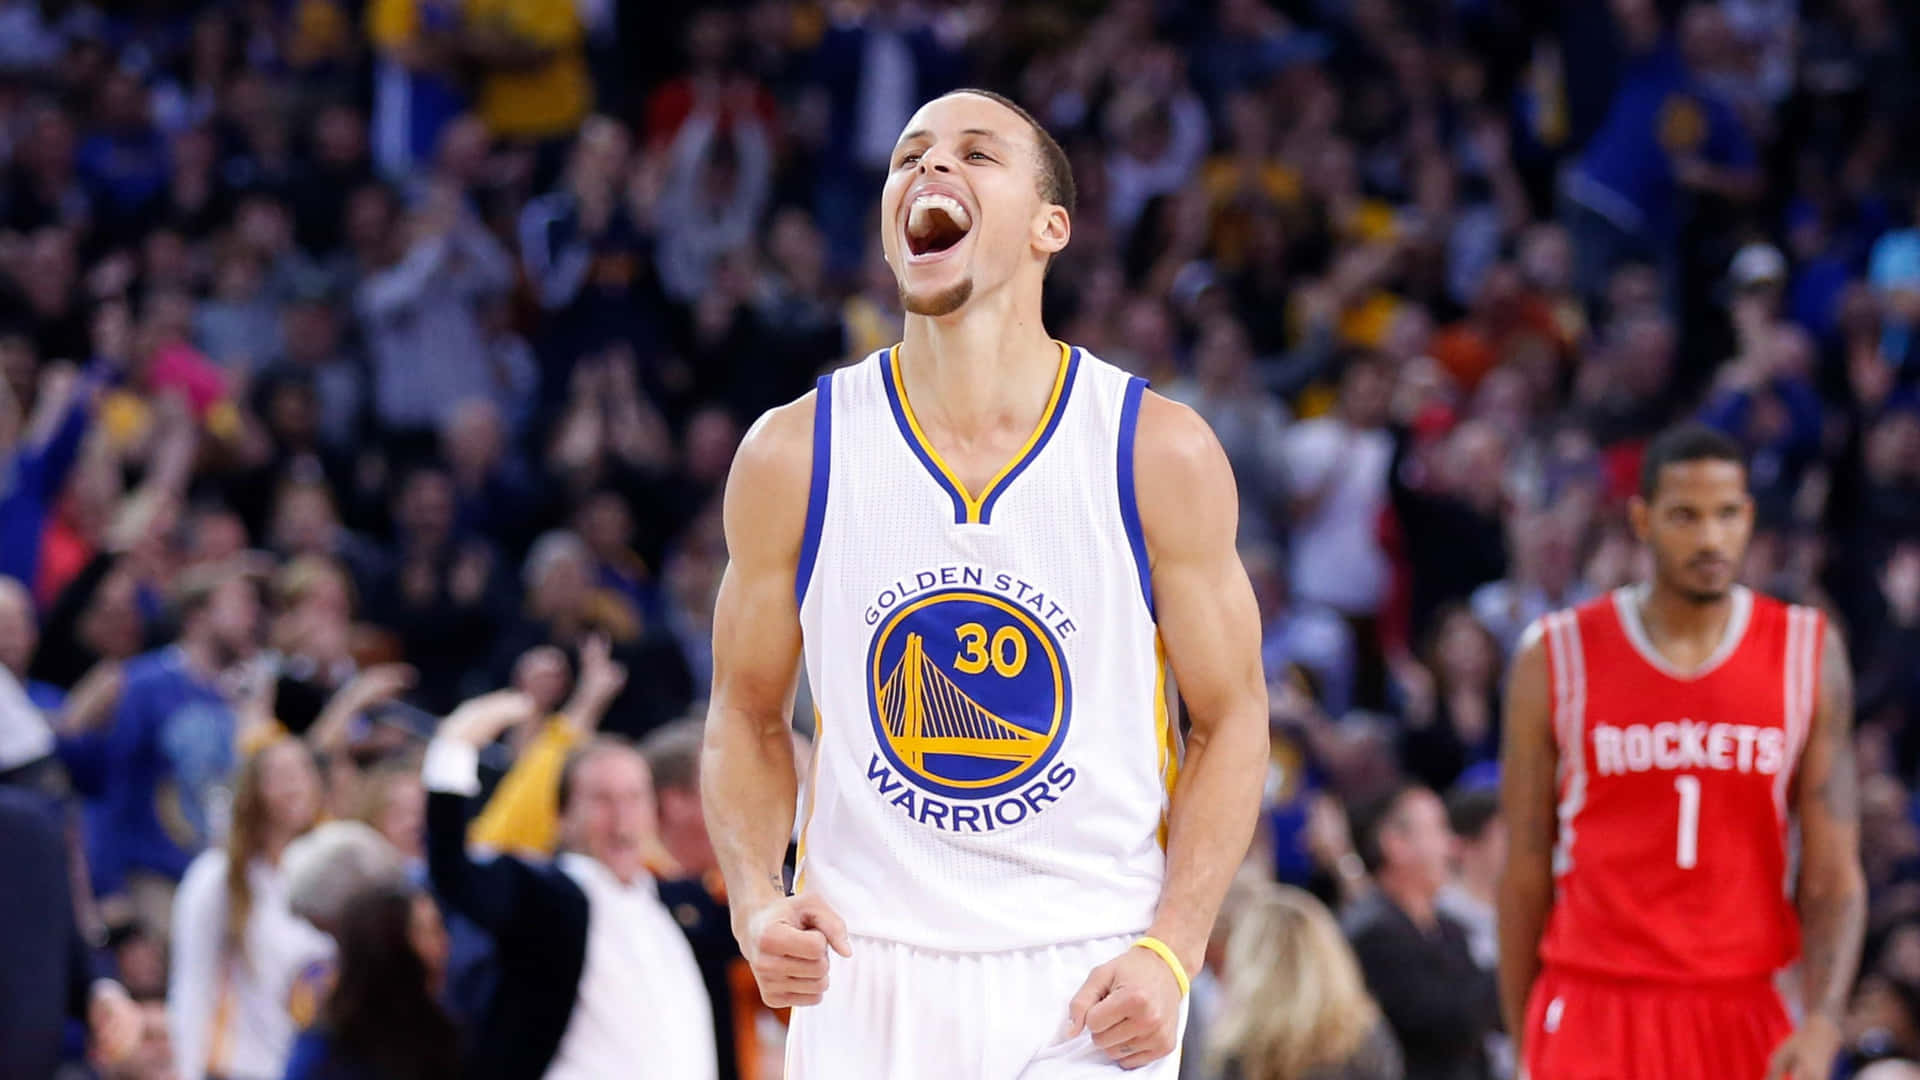 Steph Curry Reflects on His Championship Win